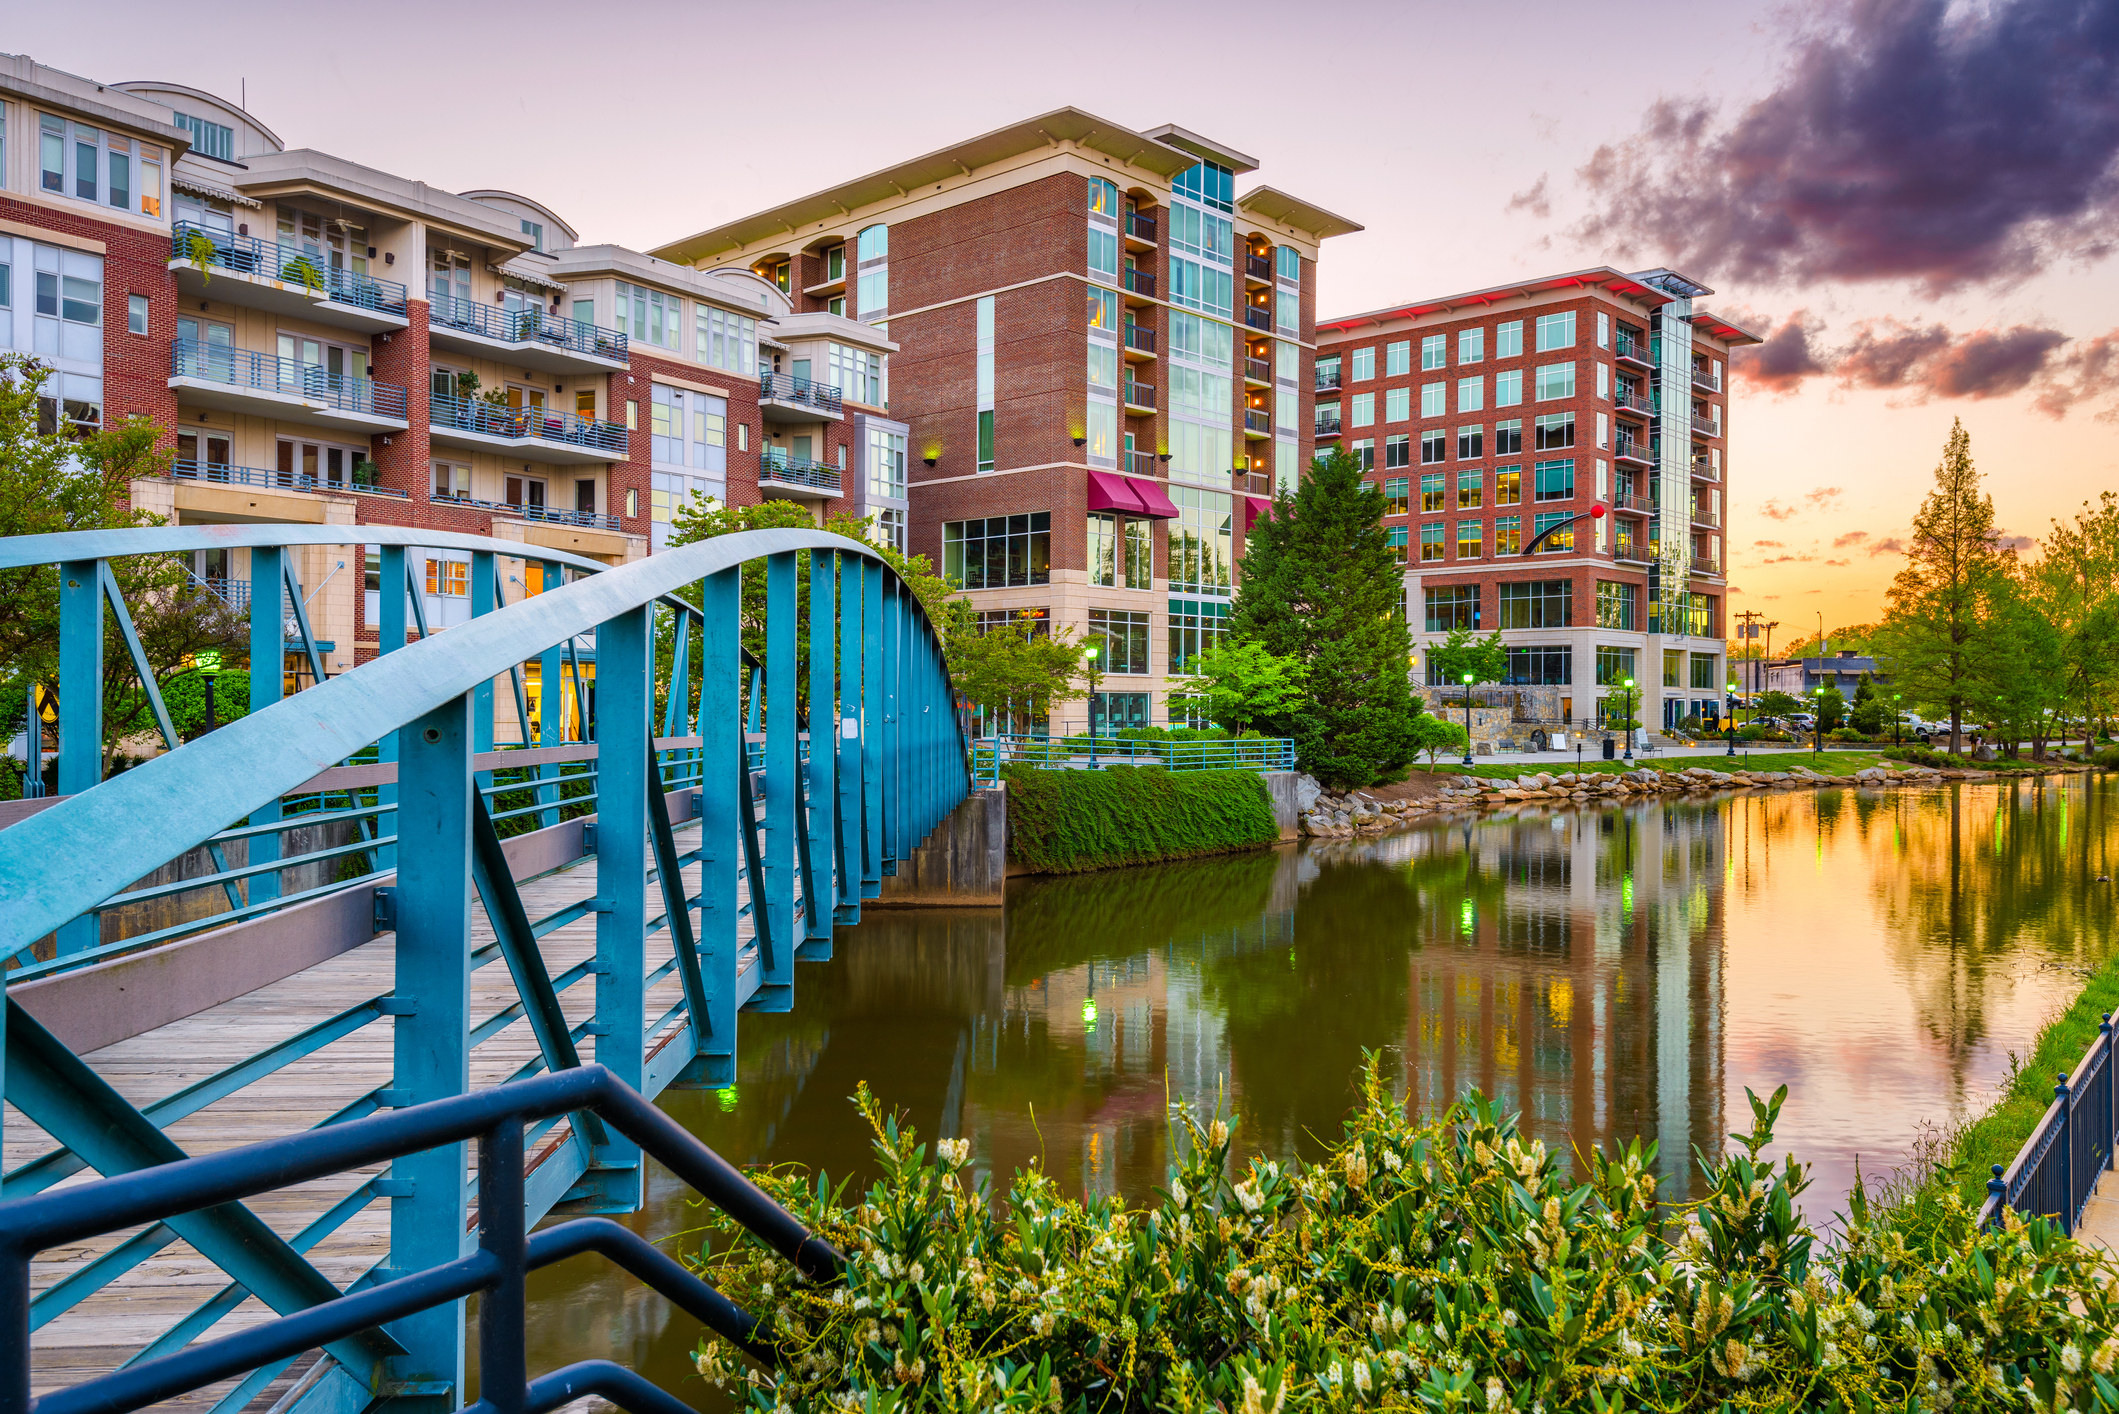 Apartment buildings on the waterfront in Greenville